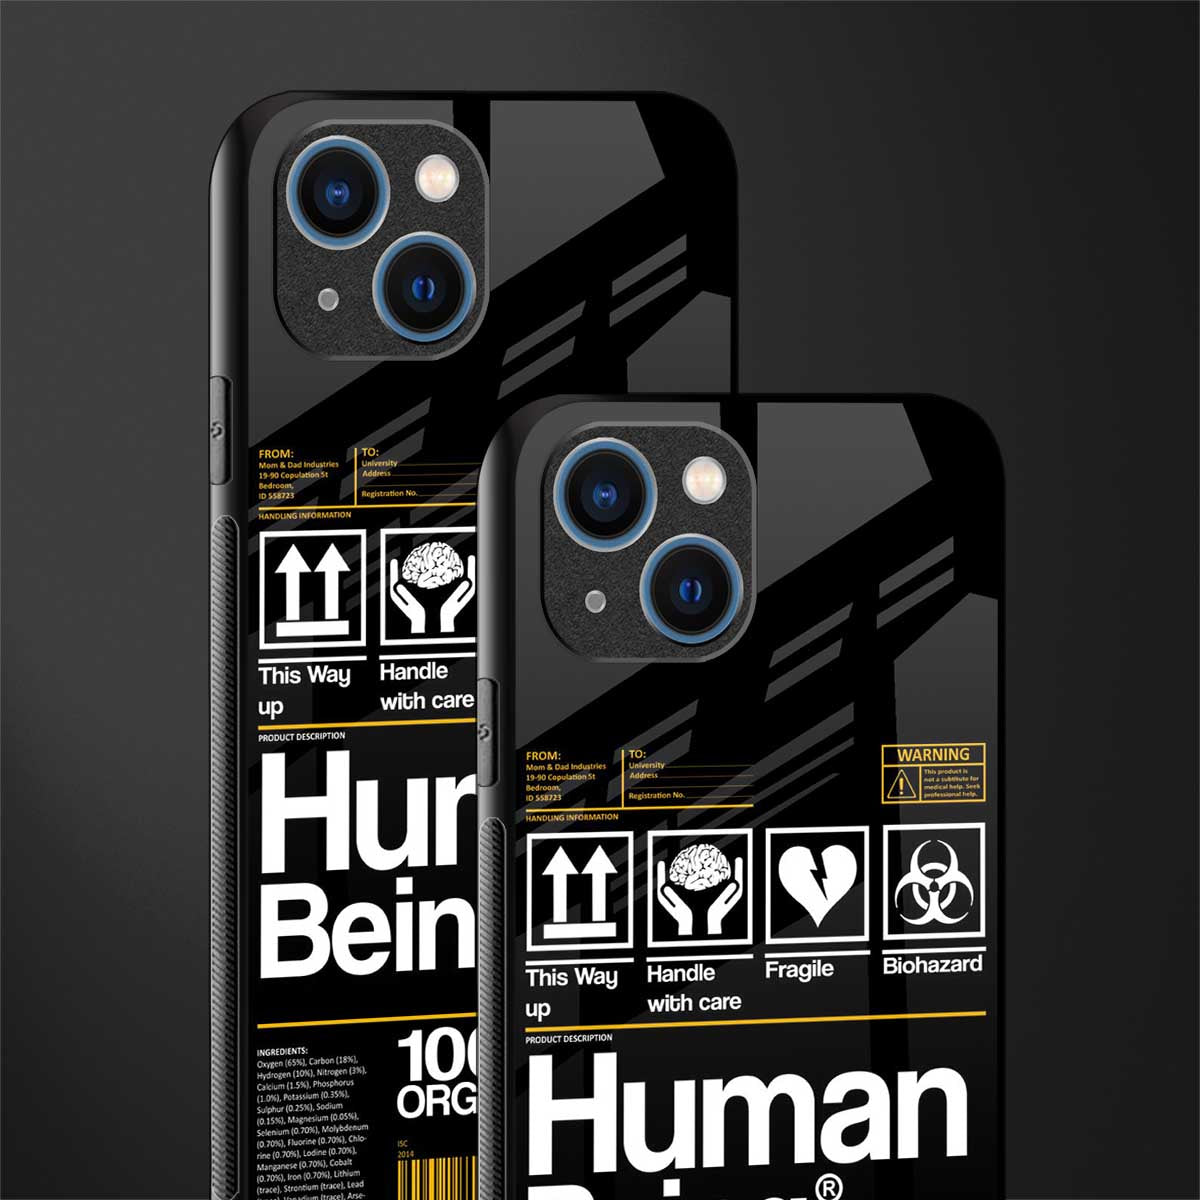 human being label phone cover for iphone 14